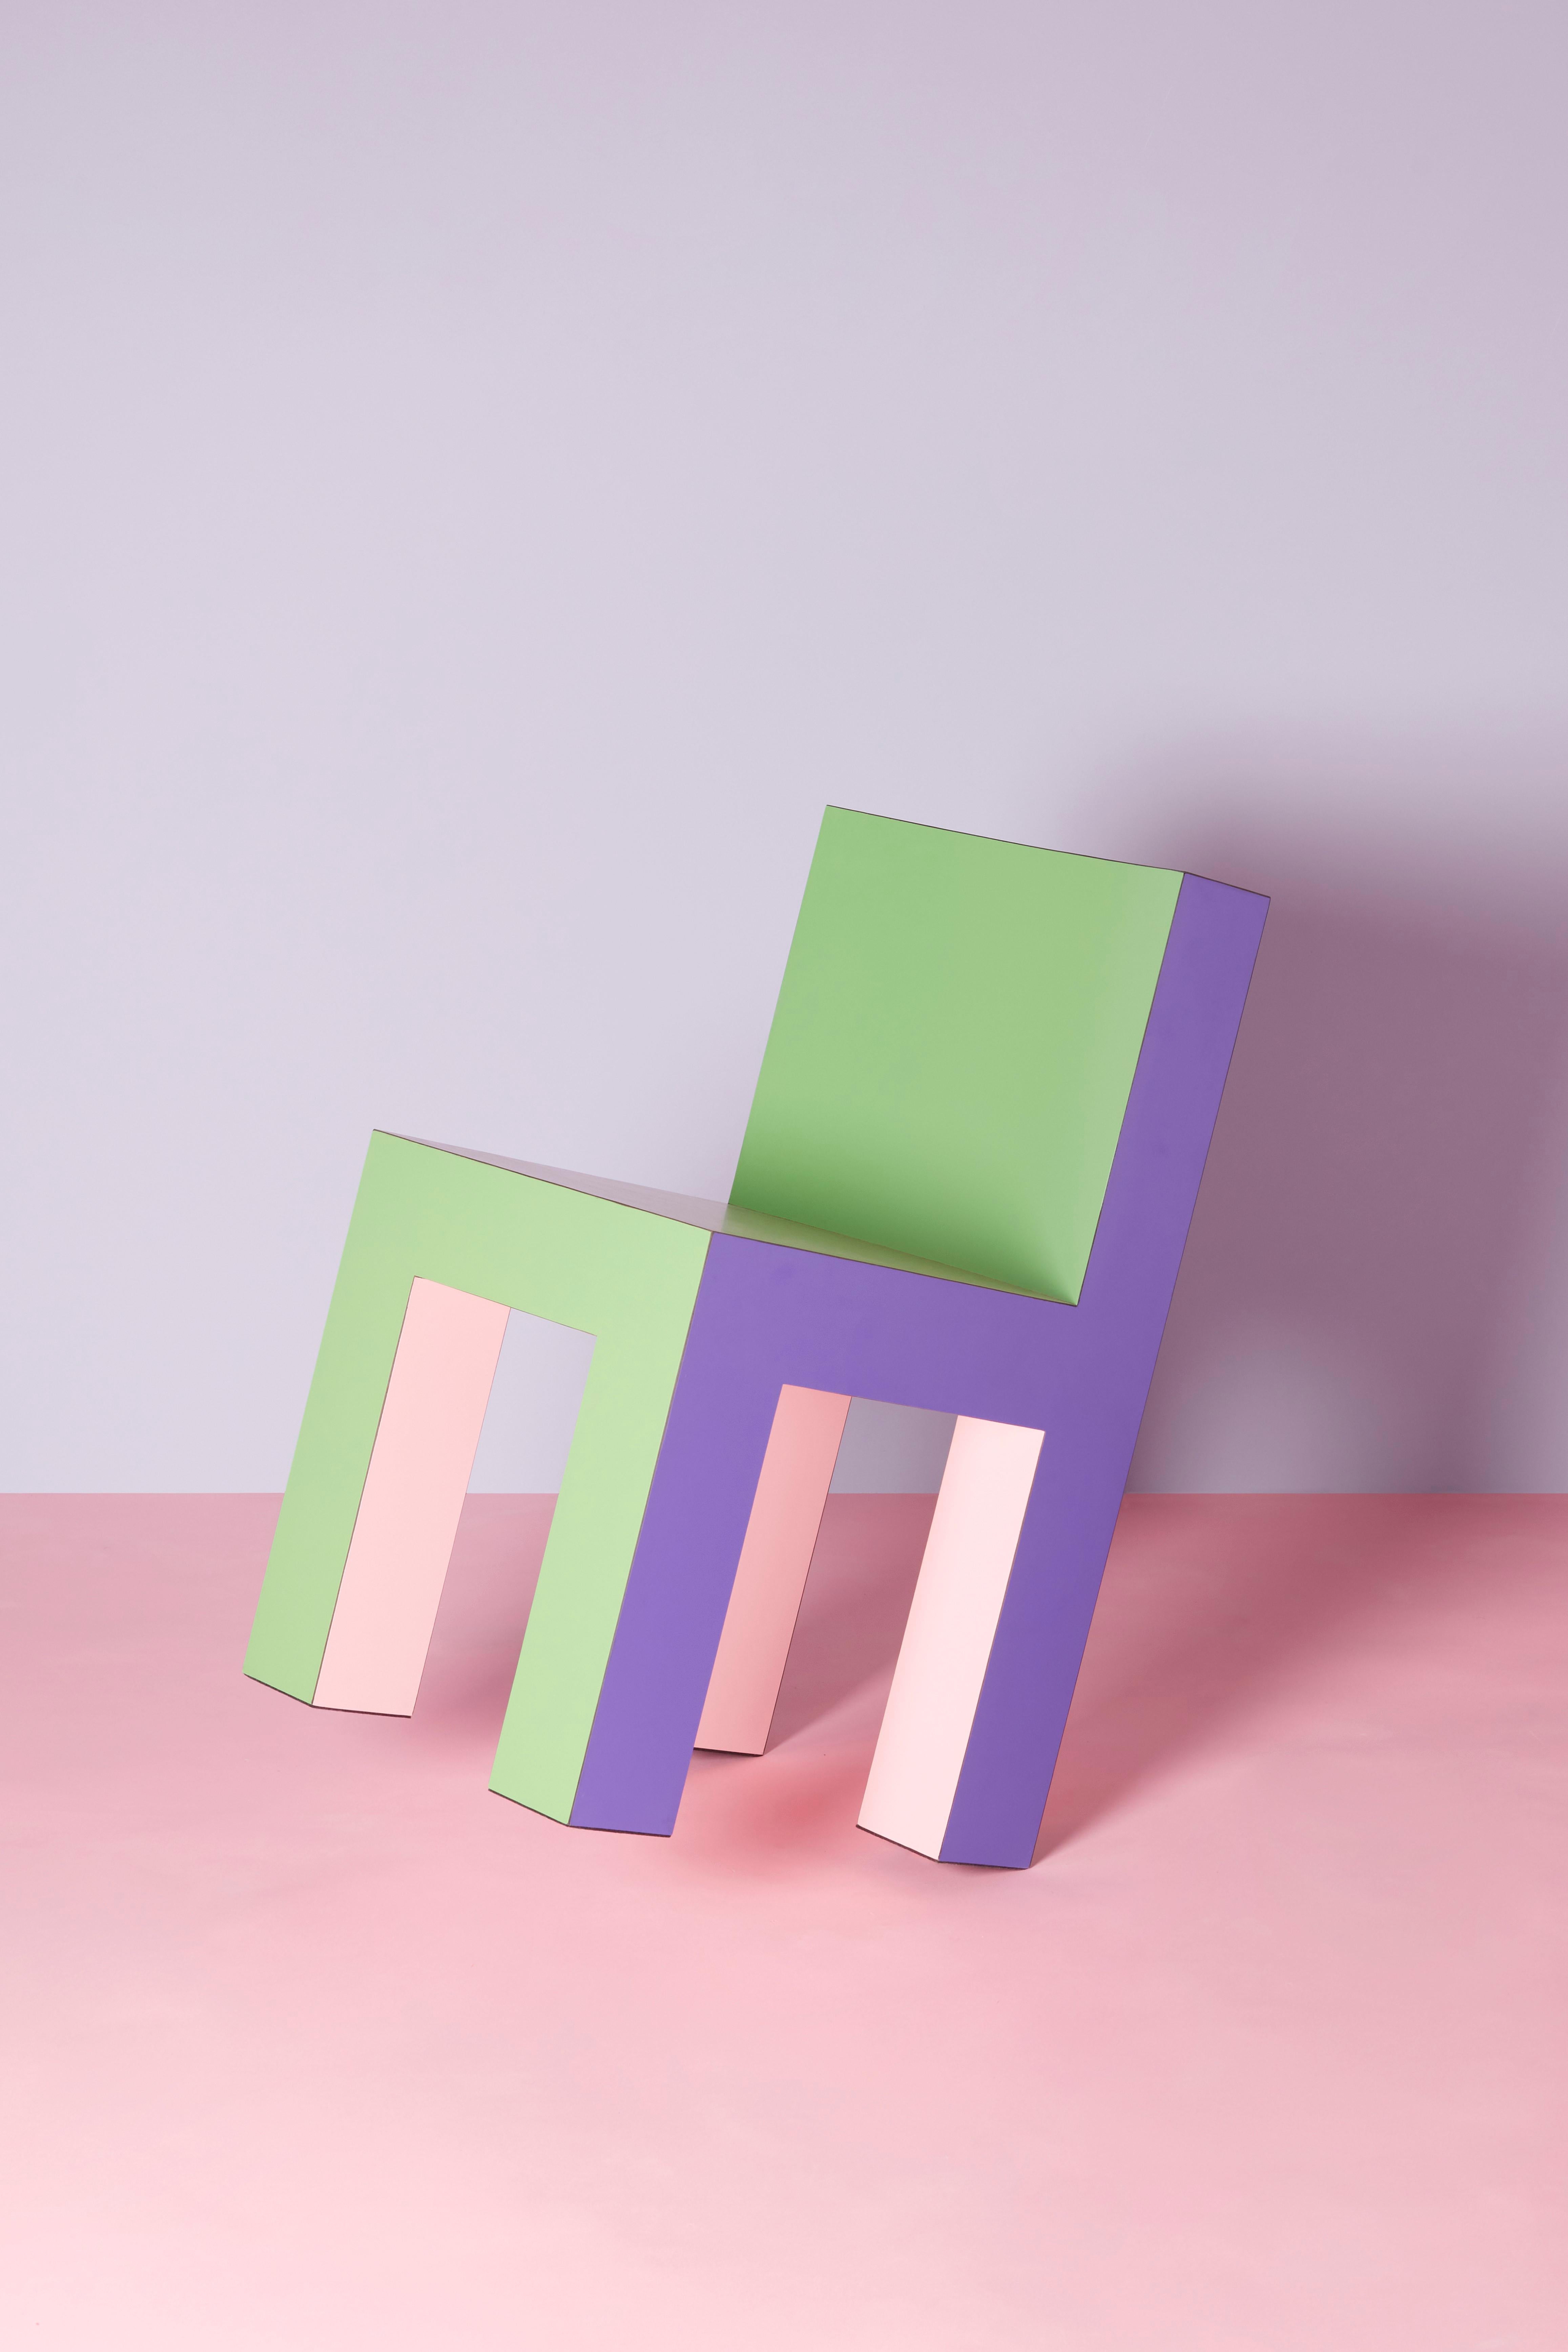 Tagadà chair is the outcome of the studio’s DNA: a matrix of rigor and playfulness, minimalism and irony. Shapes, proportions and colors comes together in an iconic design piece.

Tagadà Collection is a newly developed 
series of element. This